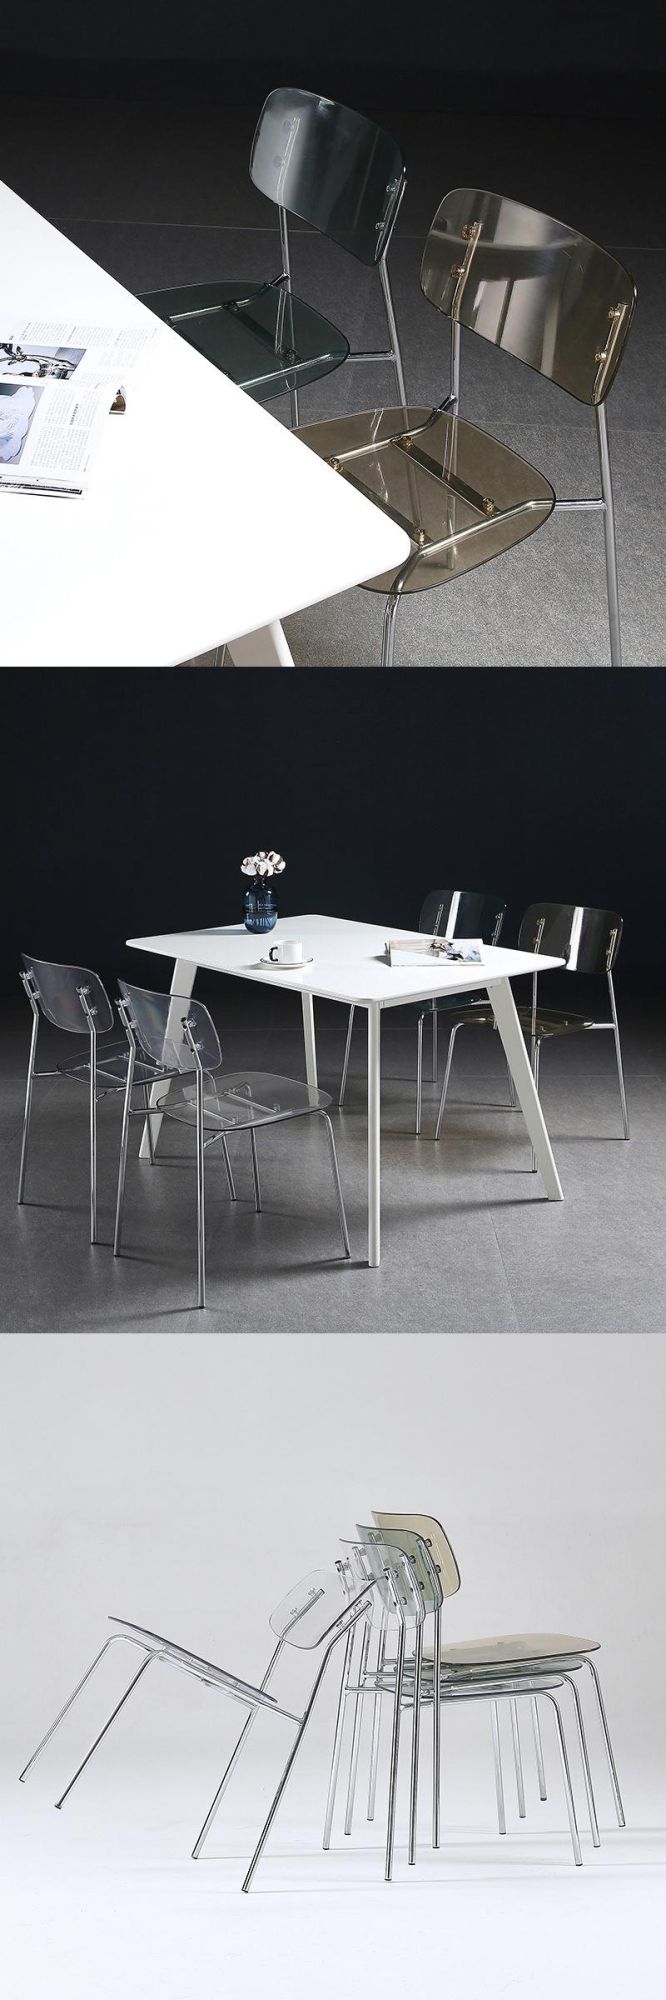 Modern Luxury Armless Acrylic Dining Room Chair Stackable Transparent PC Dining Chairs with Chromed Legs for Outdoor Furniture